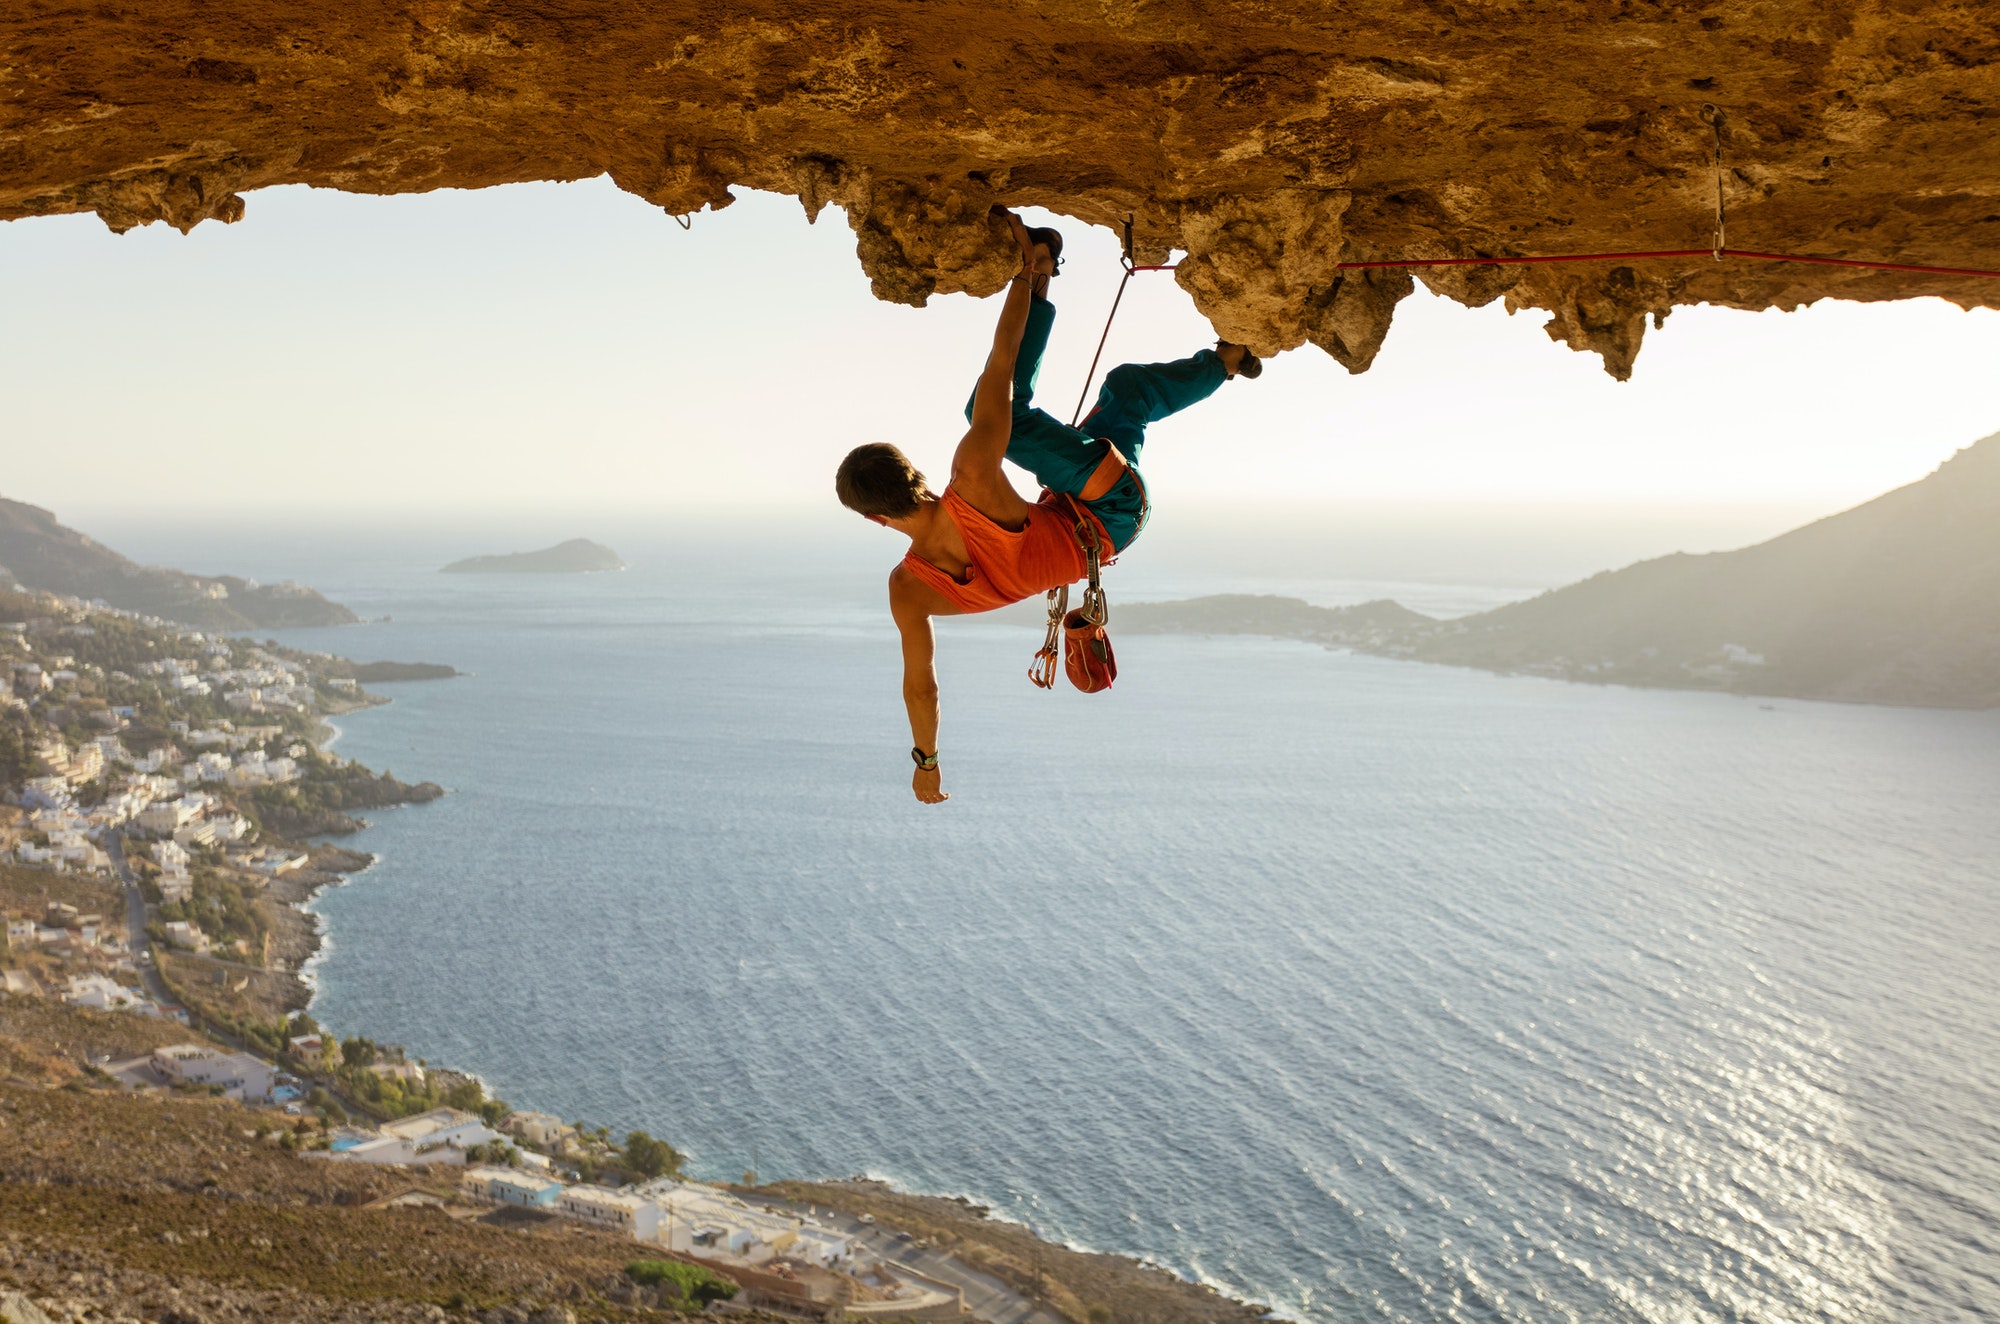 Male rock climber on challenging route